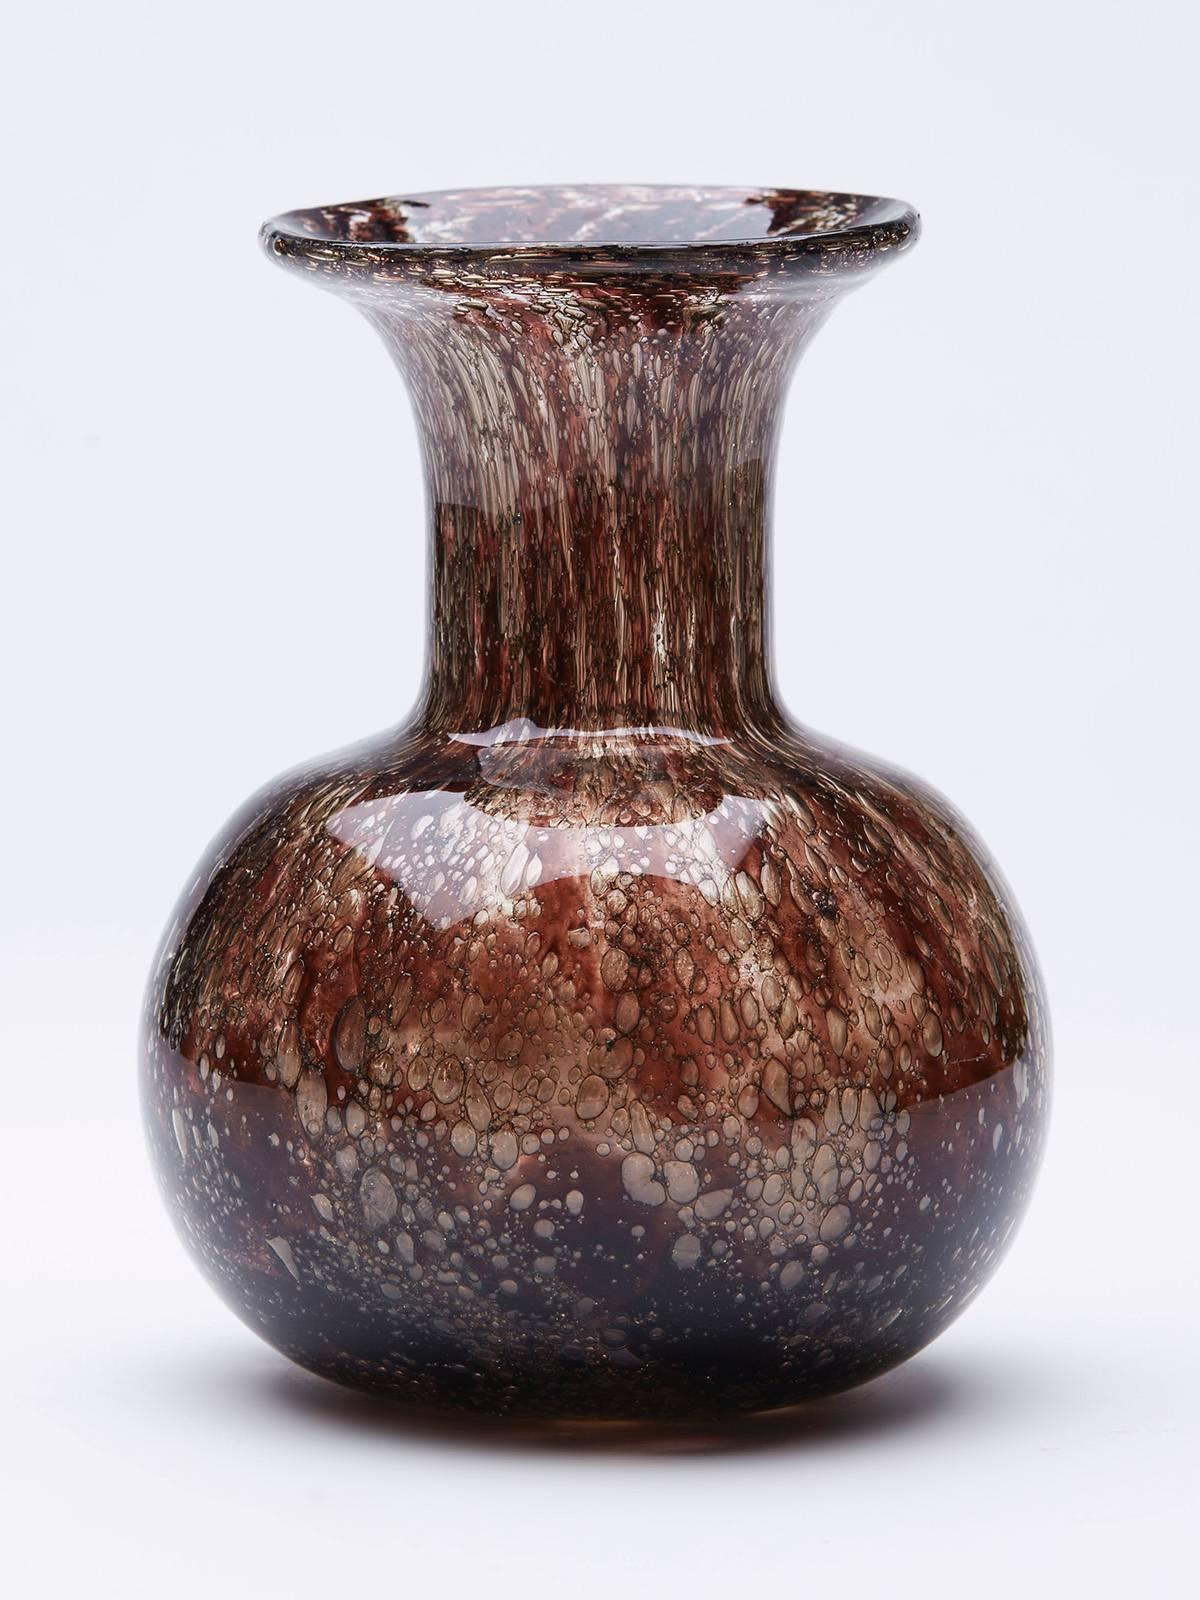 A vintage Murano Effeso art glass vase with reddy brown inclusions in a clear ground with extensive bubbling to the glass designed by Ercole Barovier for Barovier & Toso. The vase has a shaped rounded body with narrow funnel neck and trumpet shaped